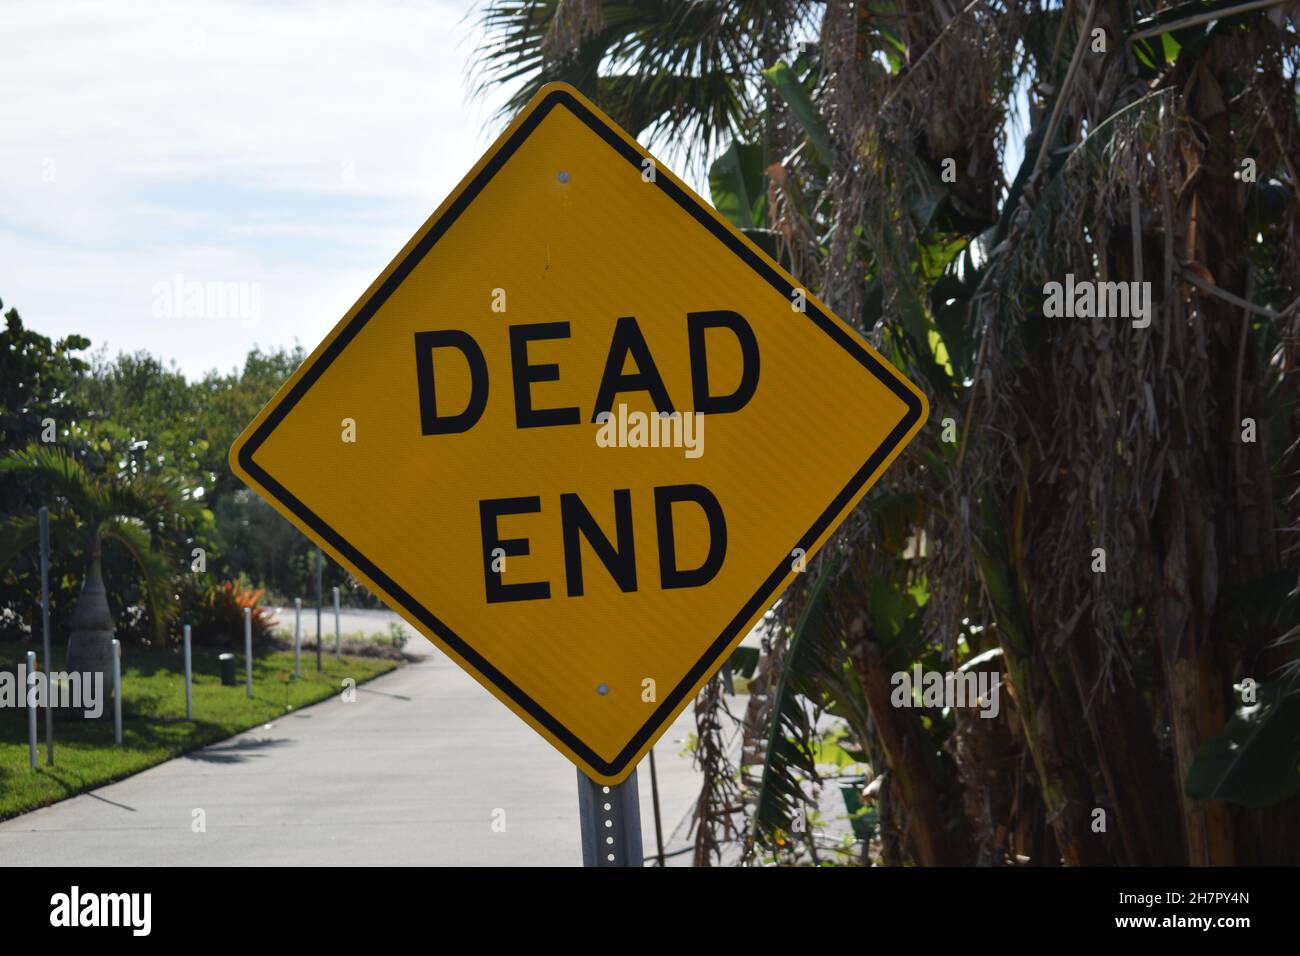 A Dead End sign. Stock Photo